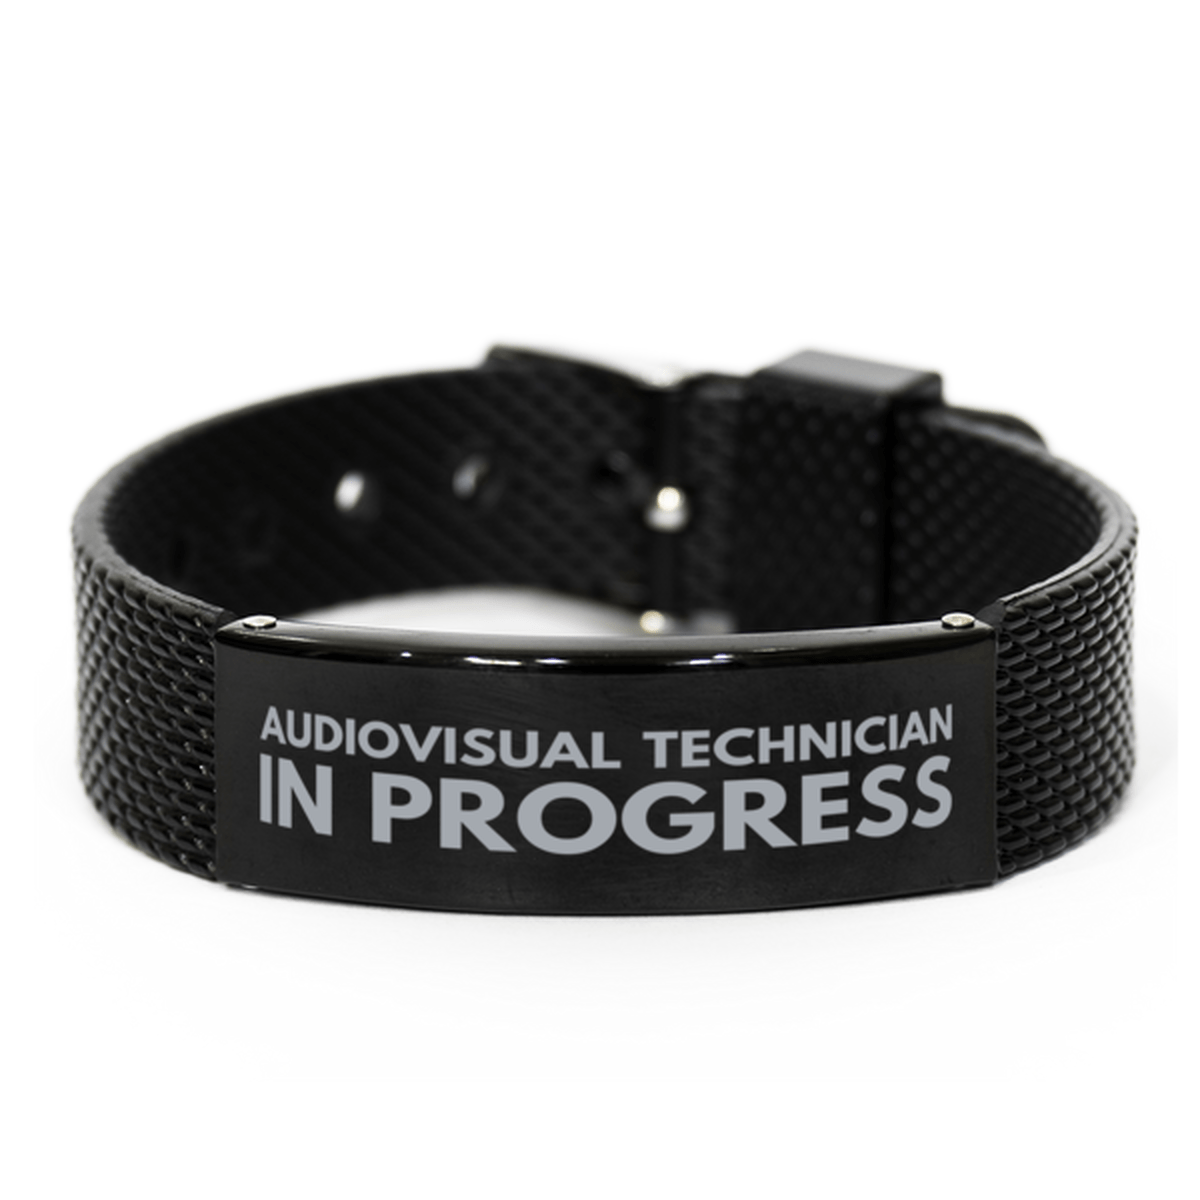 Inspirational Audiovisual Technician Black Shark Mesh Bracelet, Audiovisual Technician In Progress, Best Graduation Gifts for Students